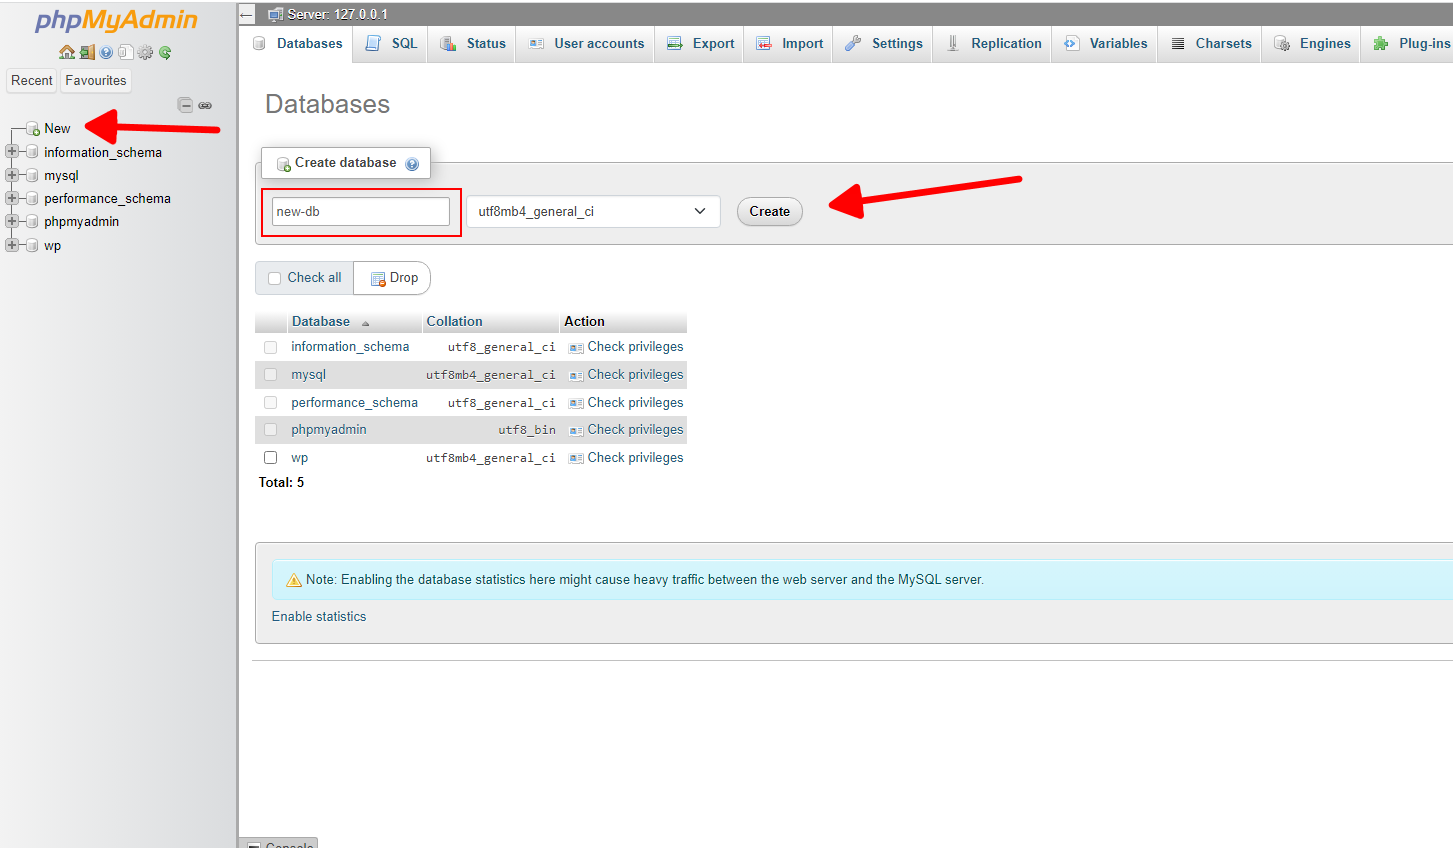 How to create a new database in the PHPMyAdmin panel.